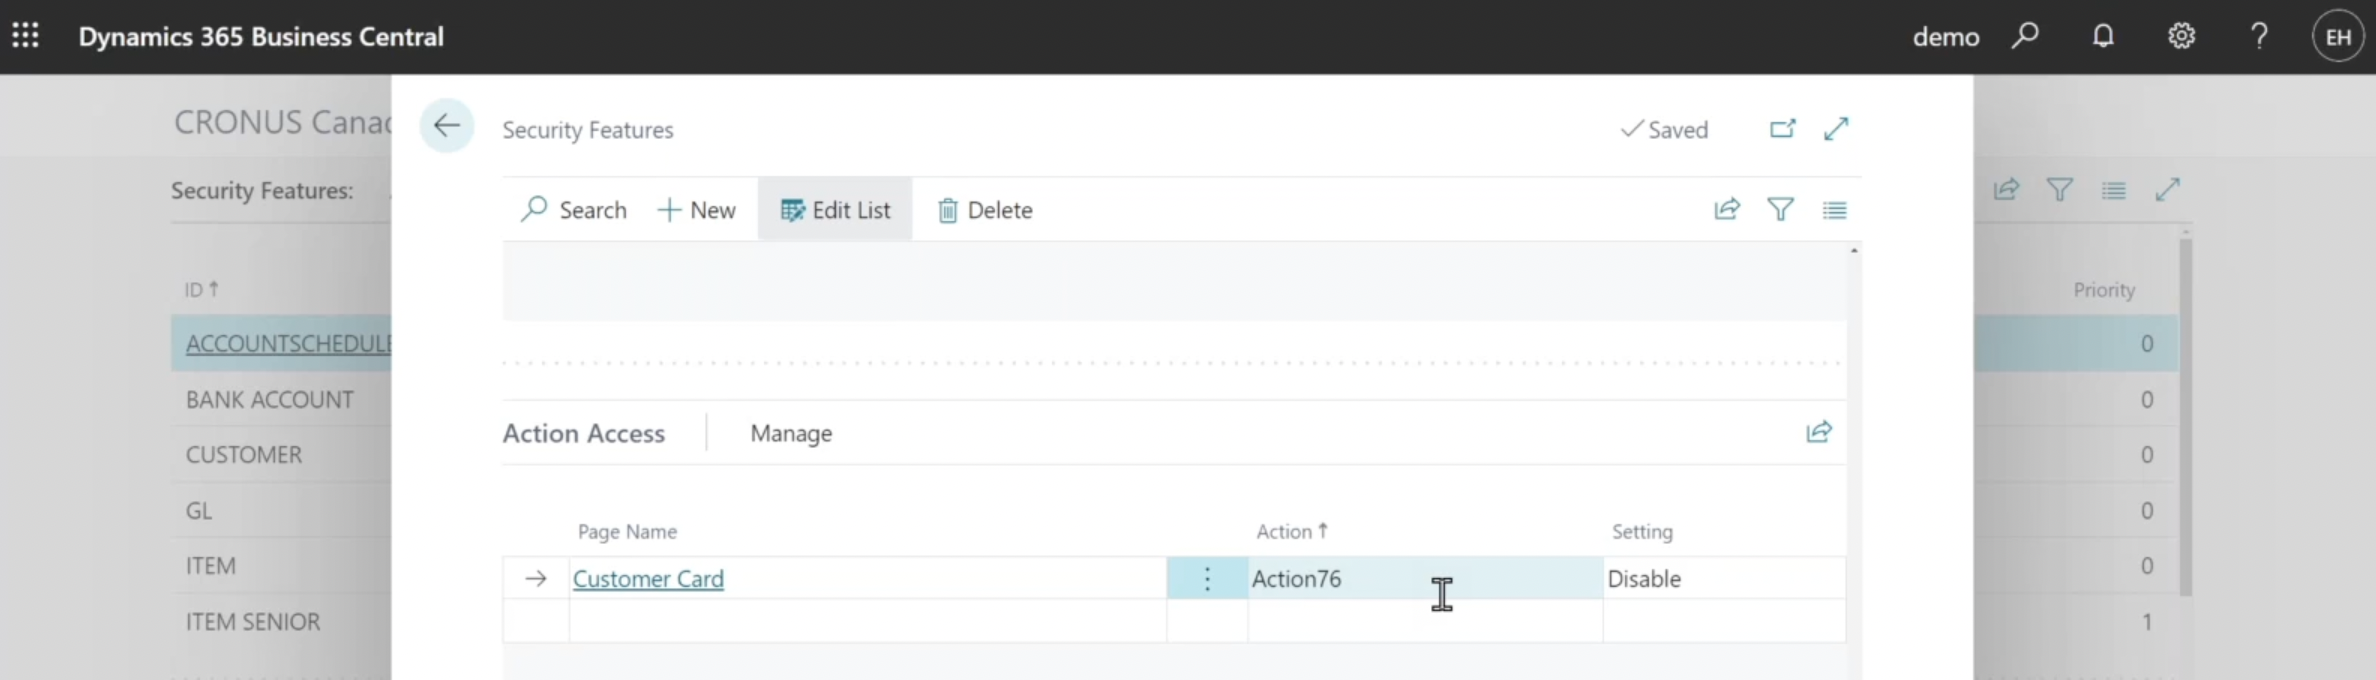 action access in Dynamics 365 Business Central